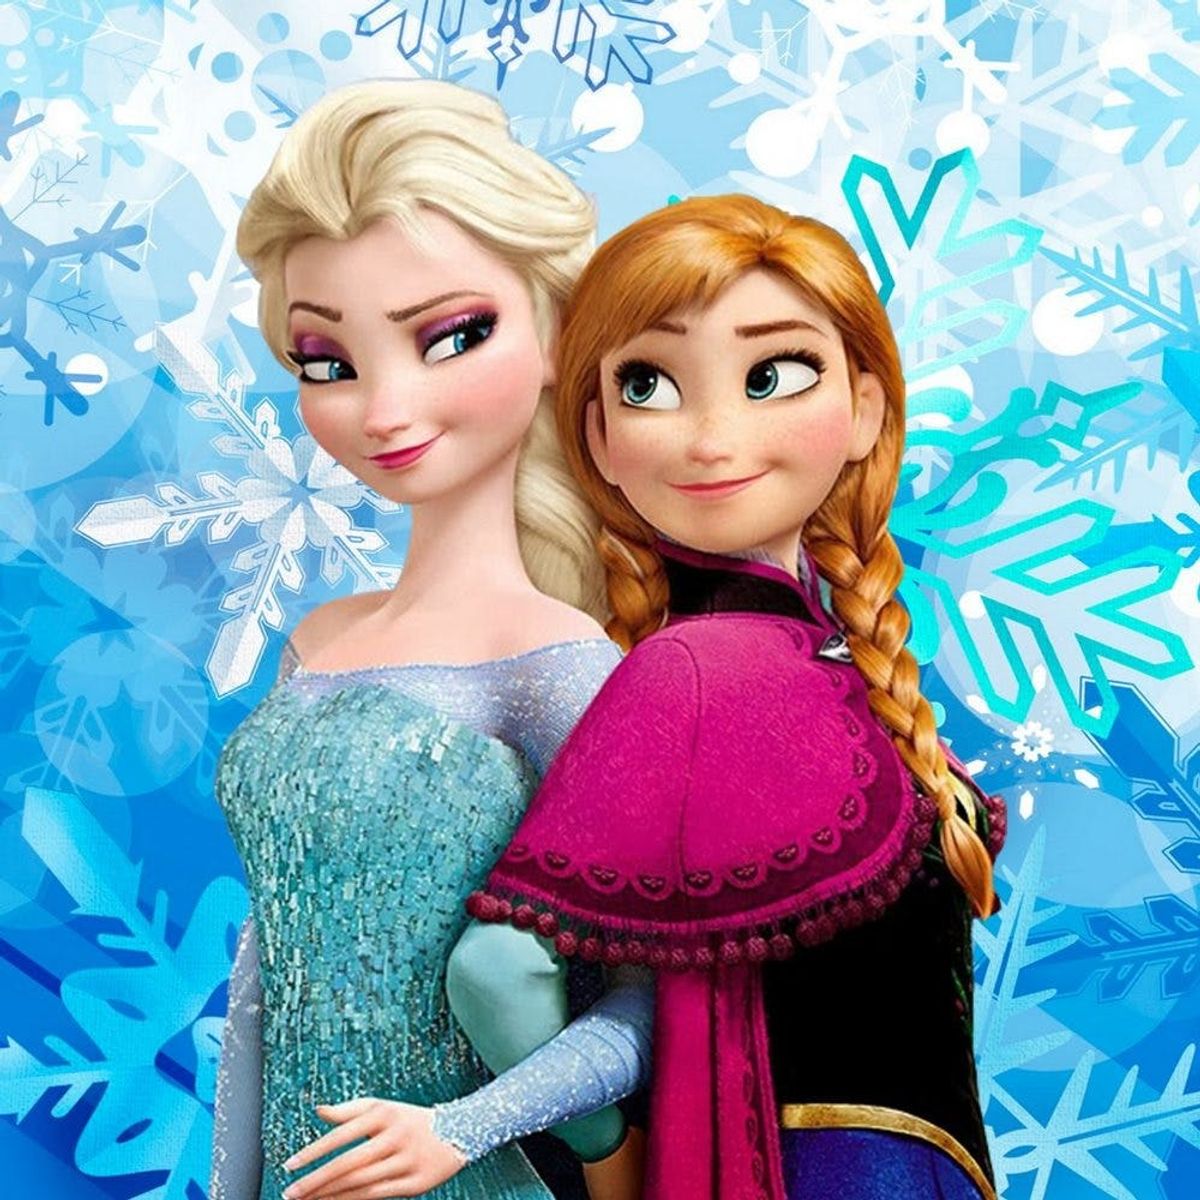 The Original Frozen Story Was a Boring Cliché and Was Possibly Anti-Feminist